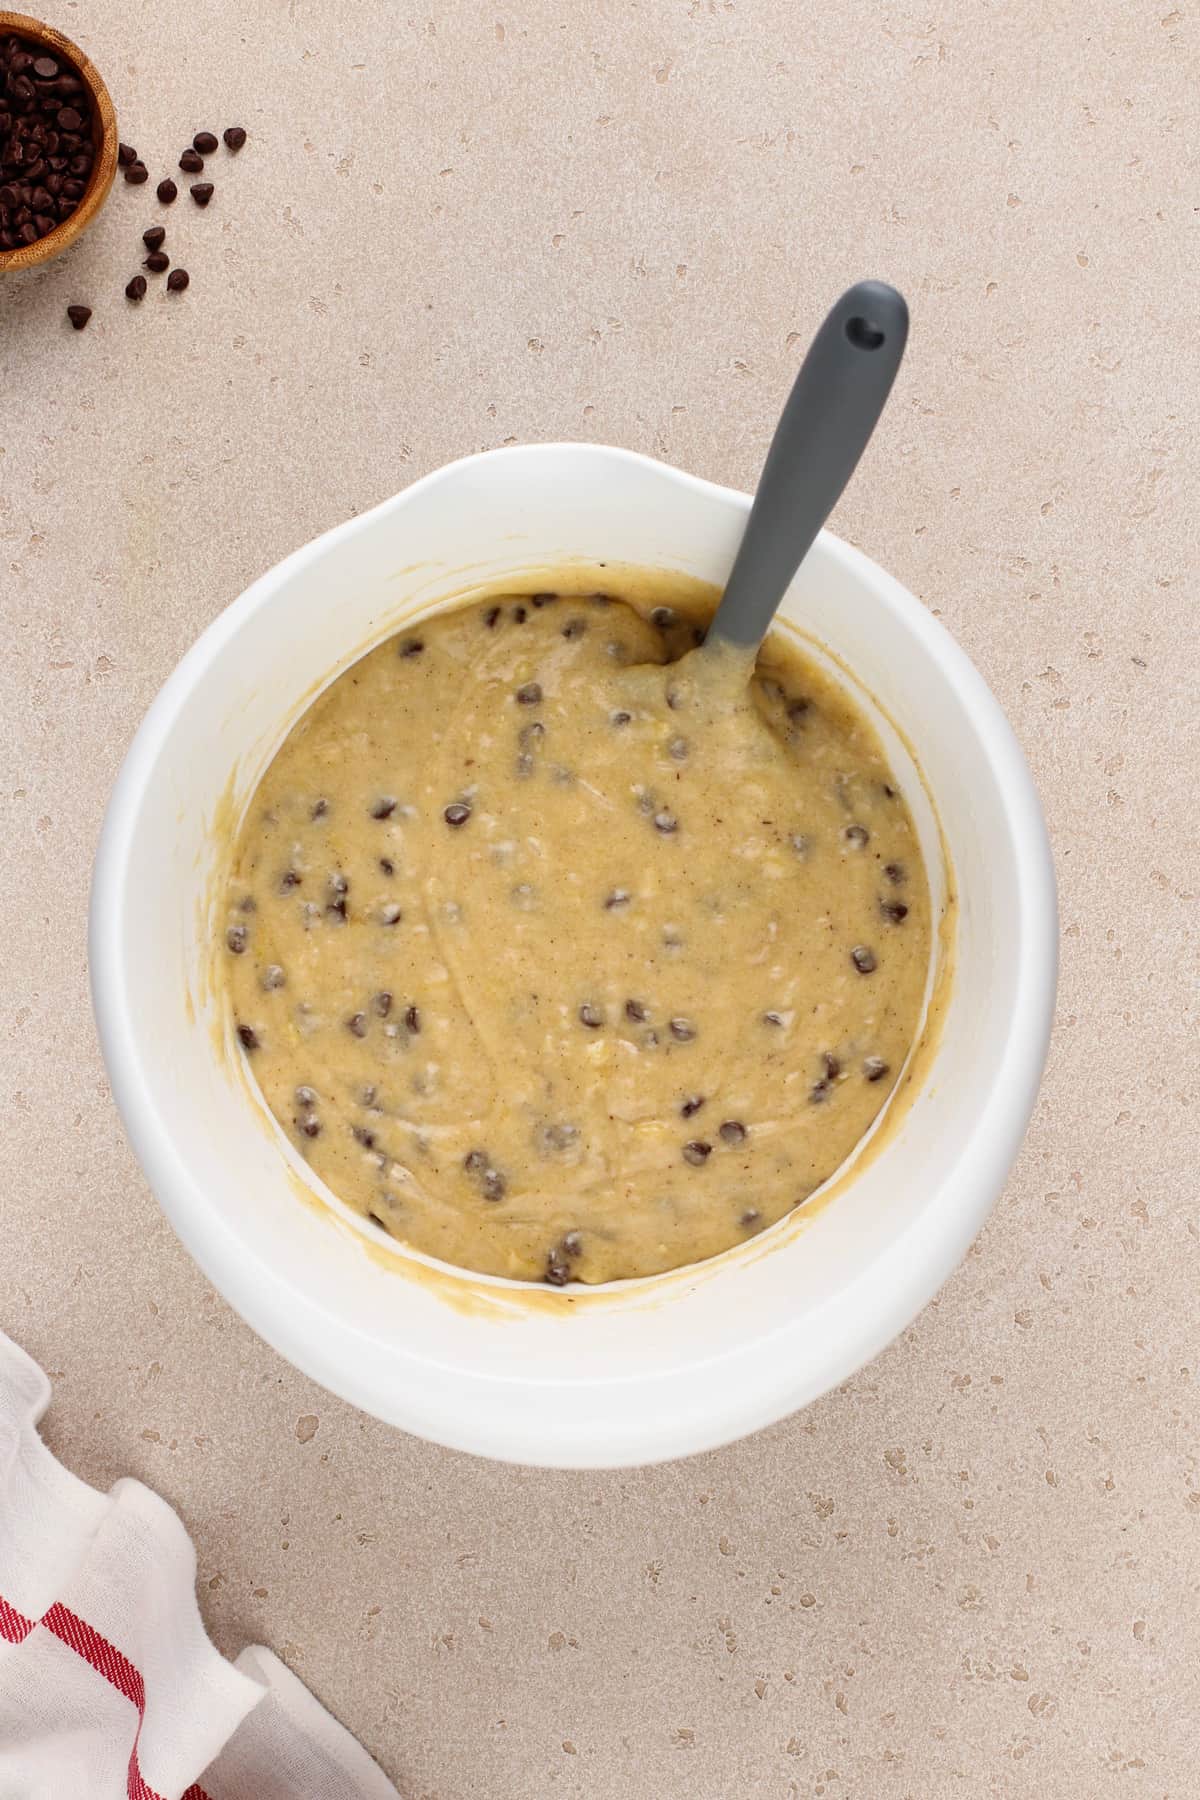 Chocolate chip banana bread batter in a white bowl.